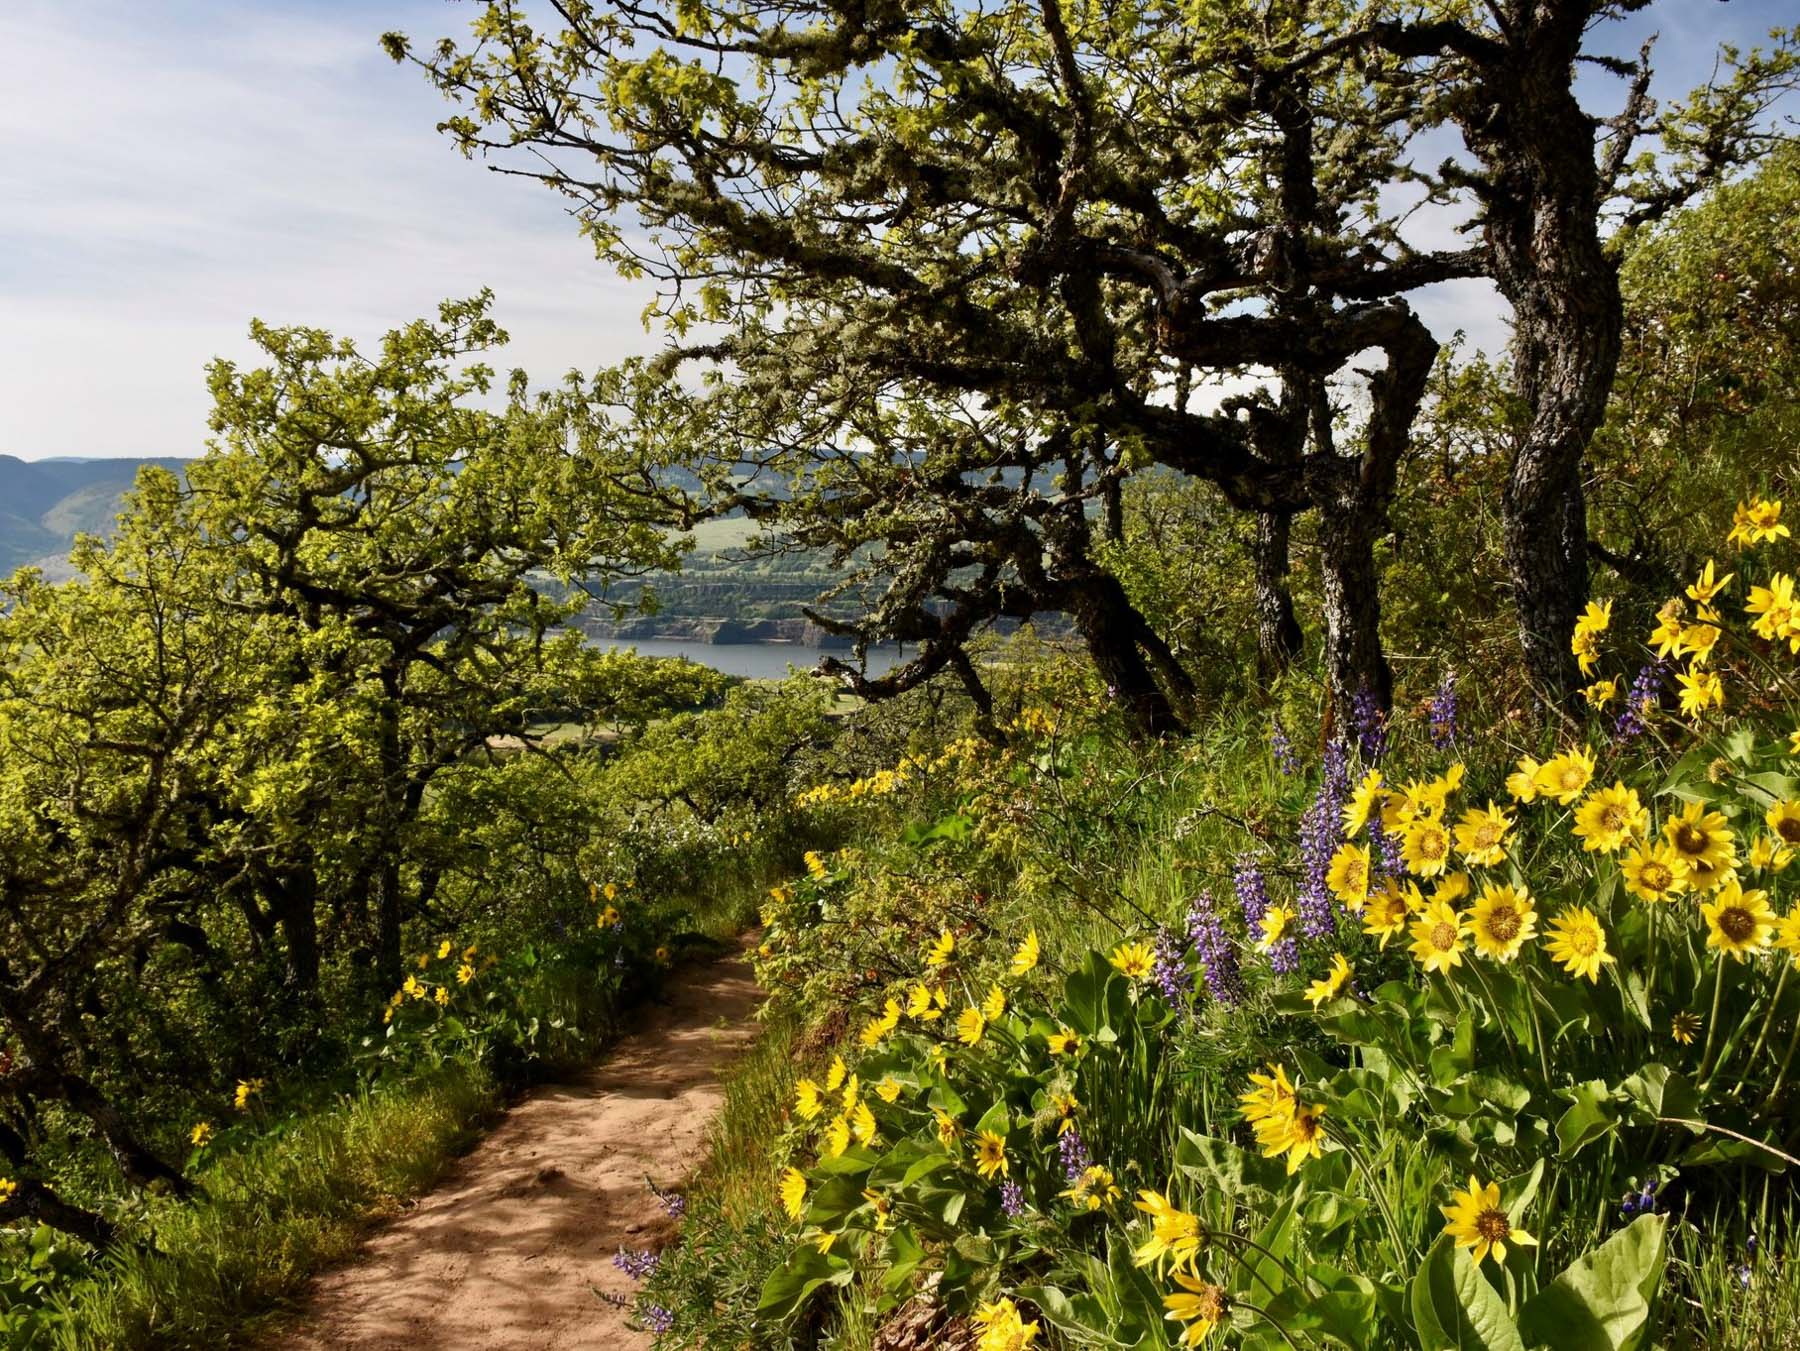 Best wildflower Hikes Columbia River Gorge

easy hikes Columbia Gorge